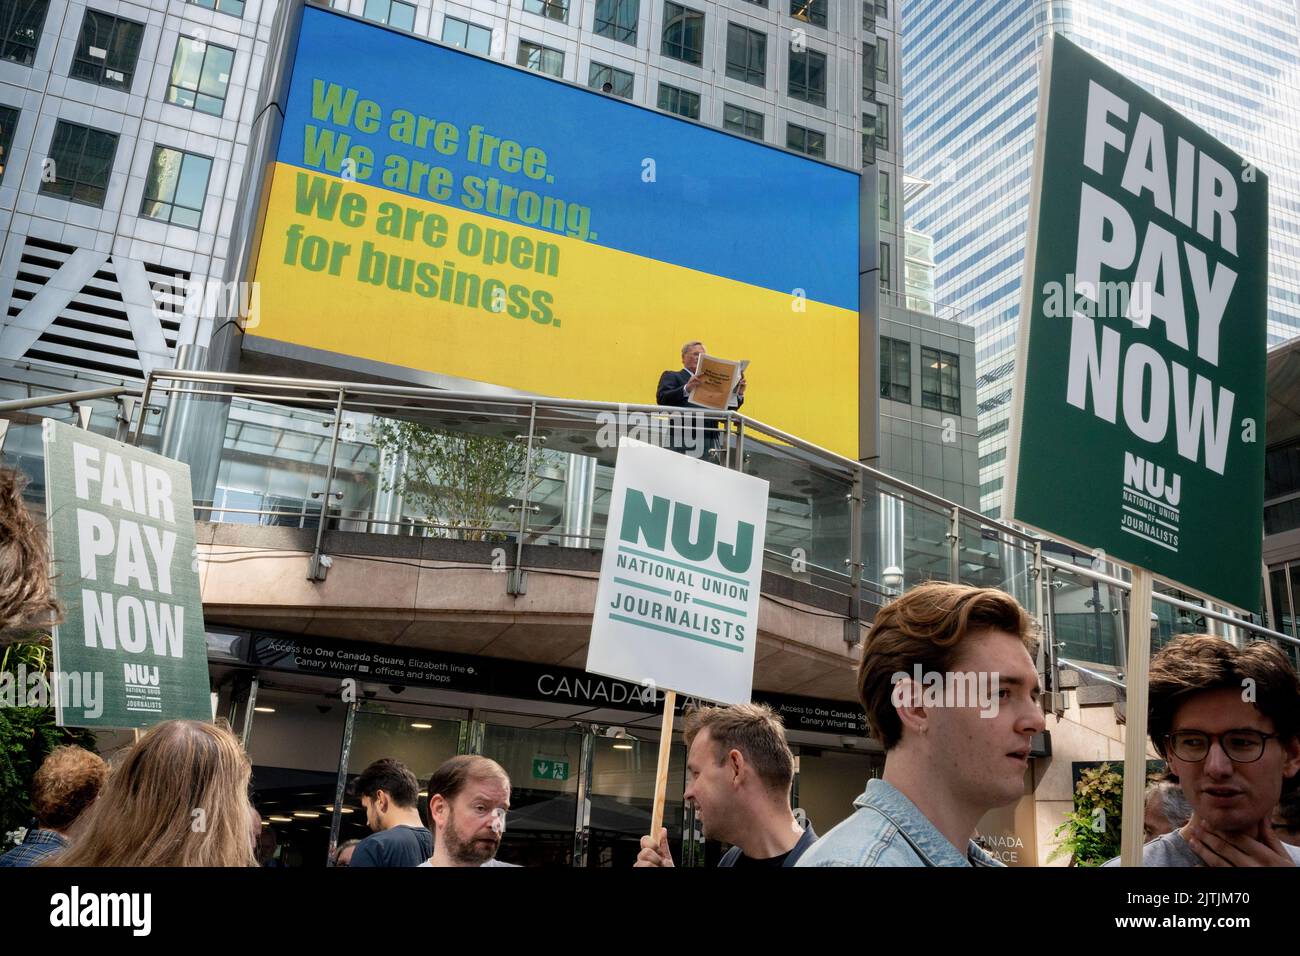 Staff working for Reach PLC stand on the National Union of Journalists (NUJ) picket line at Canary Wharf in London Docklands, on 31st August 2022. NUJ members across Reach titles include those at the Daily Mirror, Daily Express and Manchester Evening News. The National Union of Journalists says an estimated 1,150 members working for Reach plc titles have begun the first of four days of strike action in a bid to secure an increase in salary. NUJ members voted to reject a 3% pay offer from the company. Stock Photo